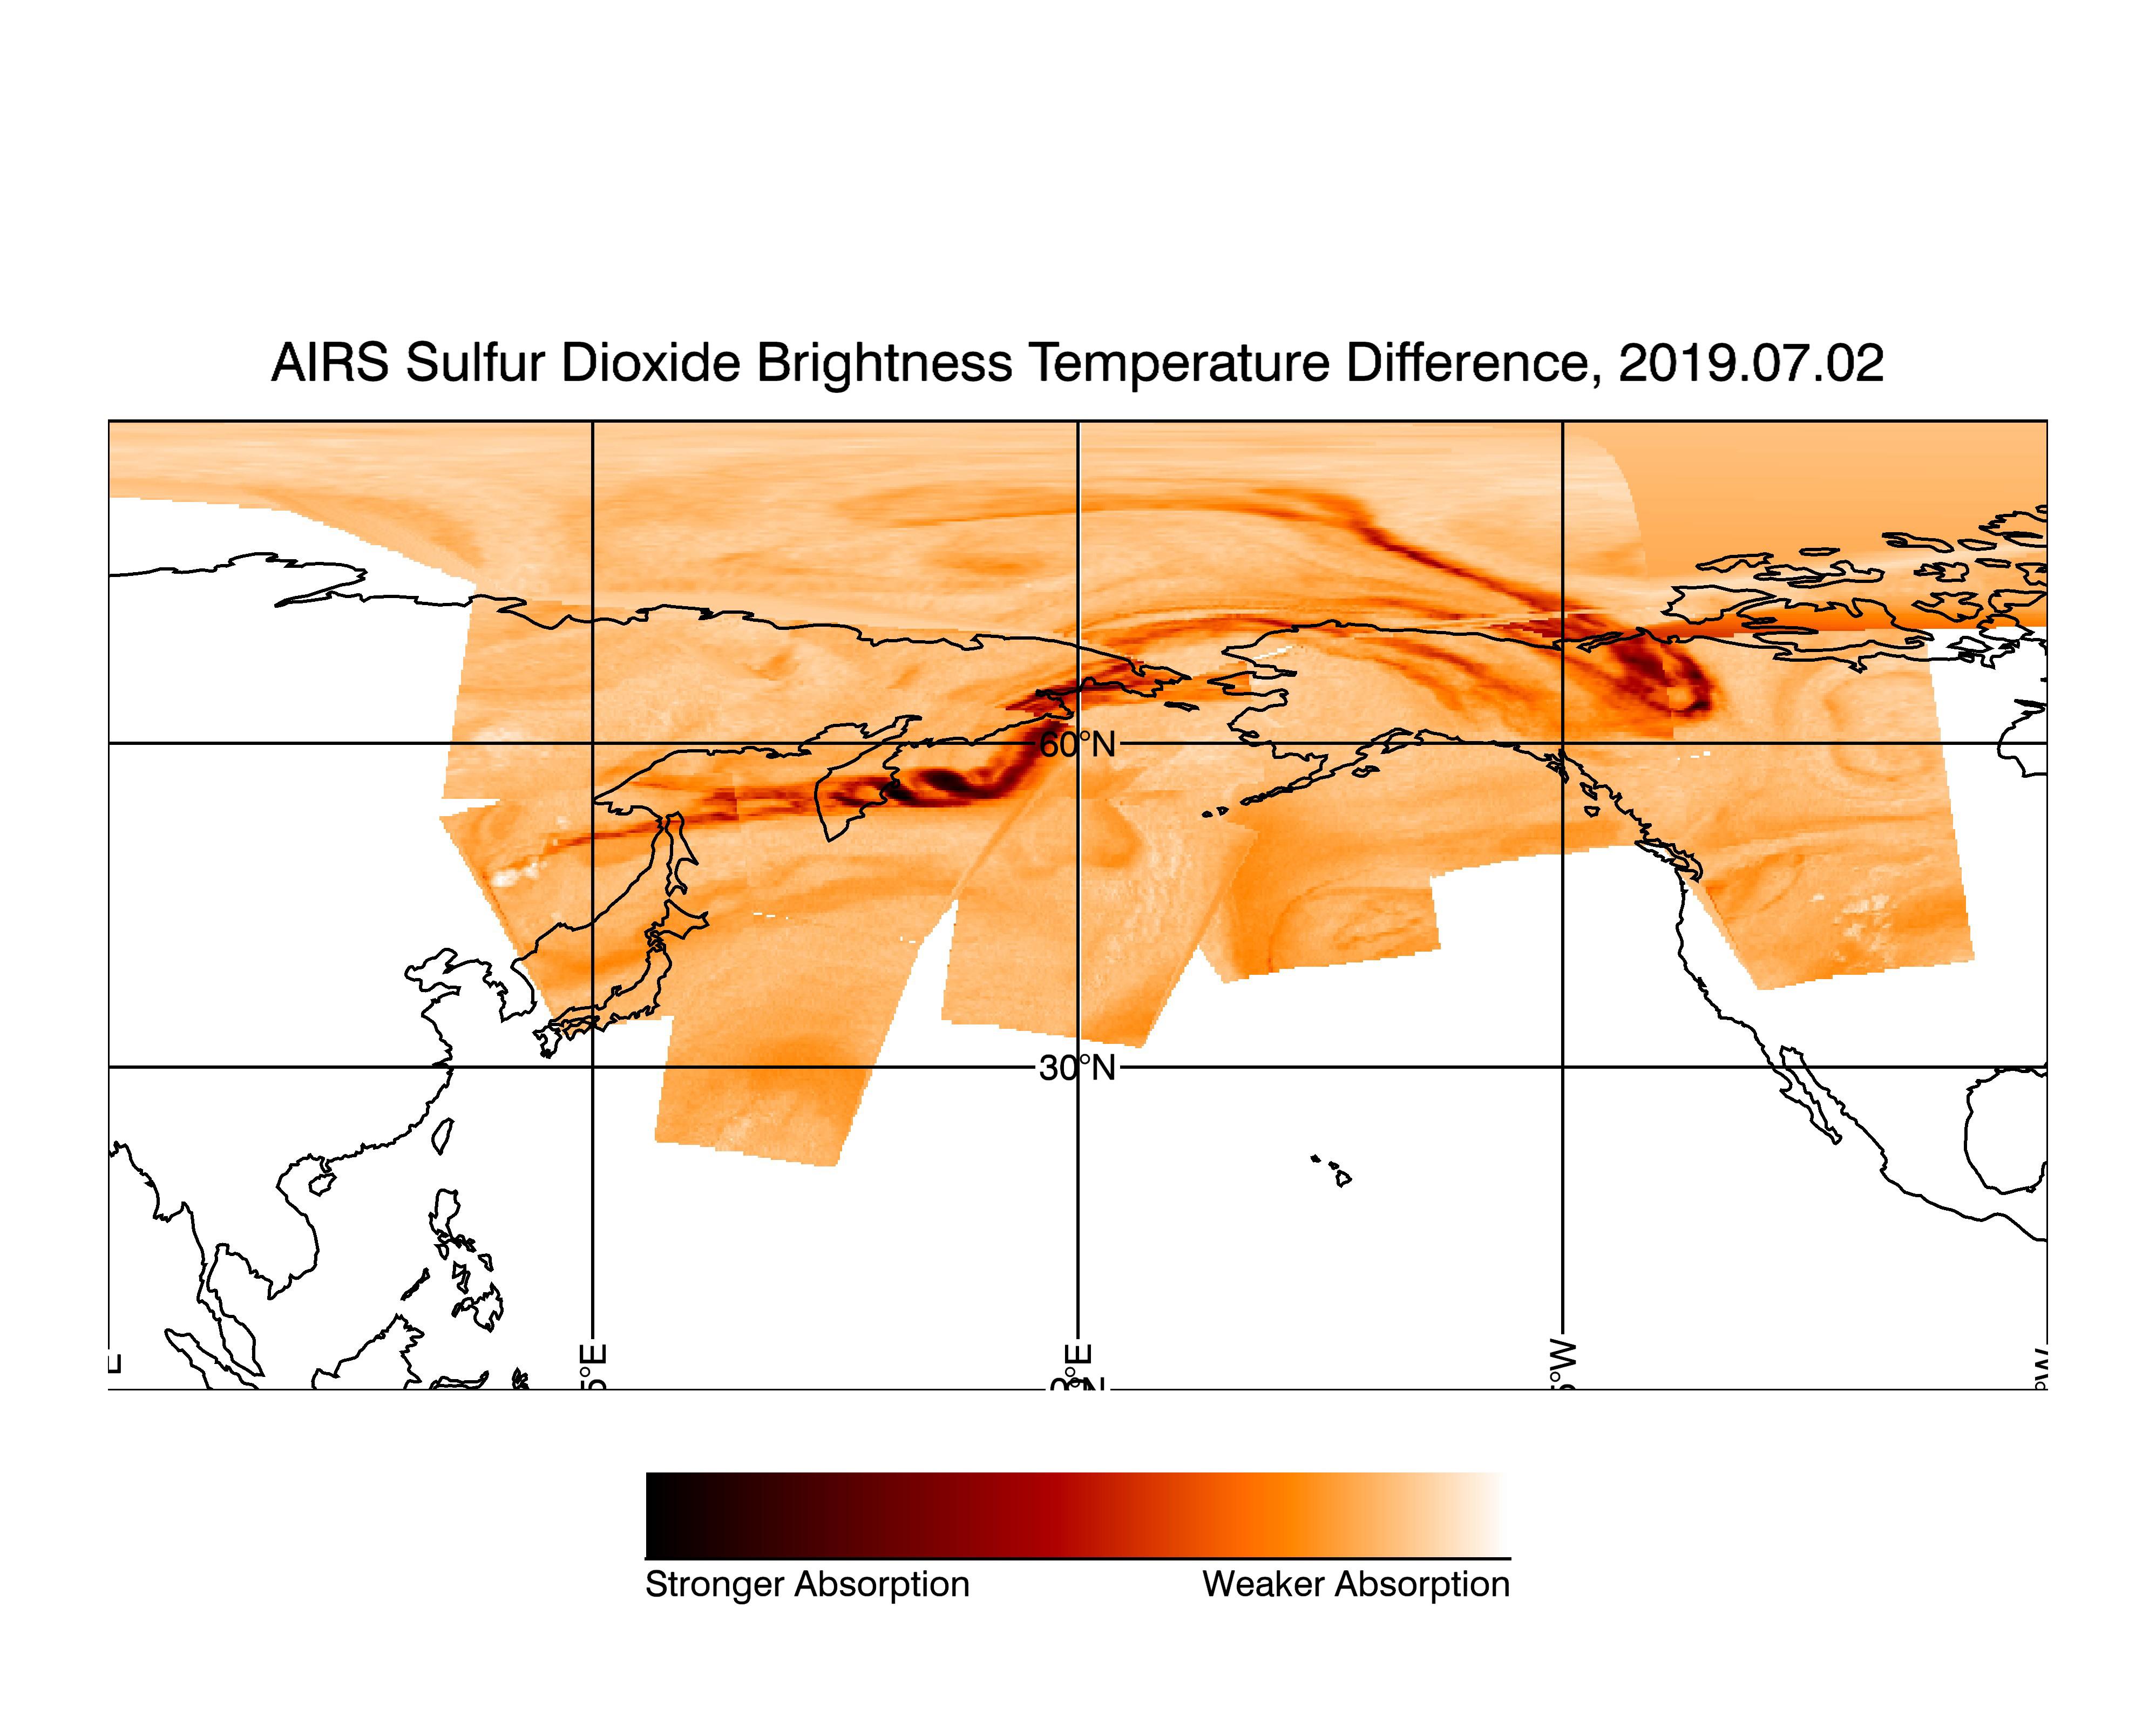 Image of sulfur dioxide detected through AIRS brightness temperature differences several days after Raikoke volcanic eruption in 2019